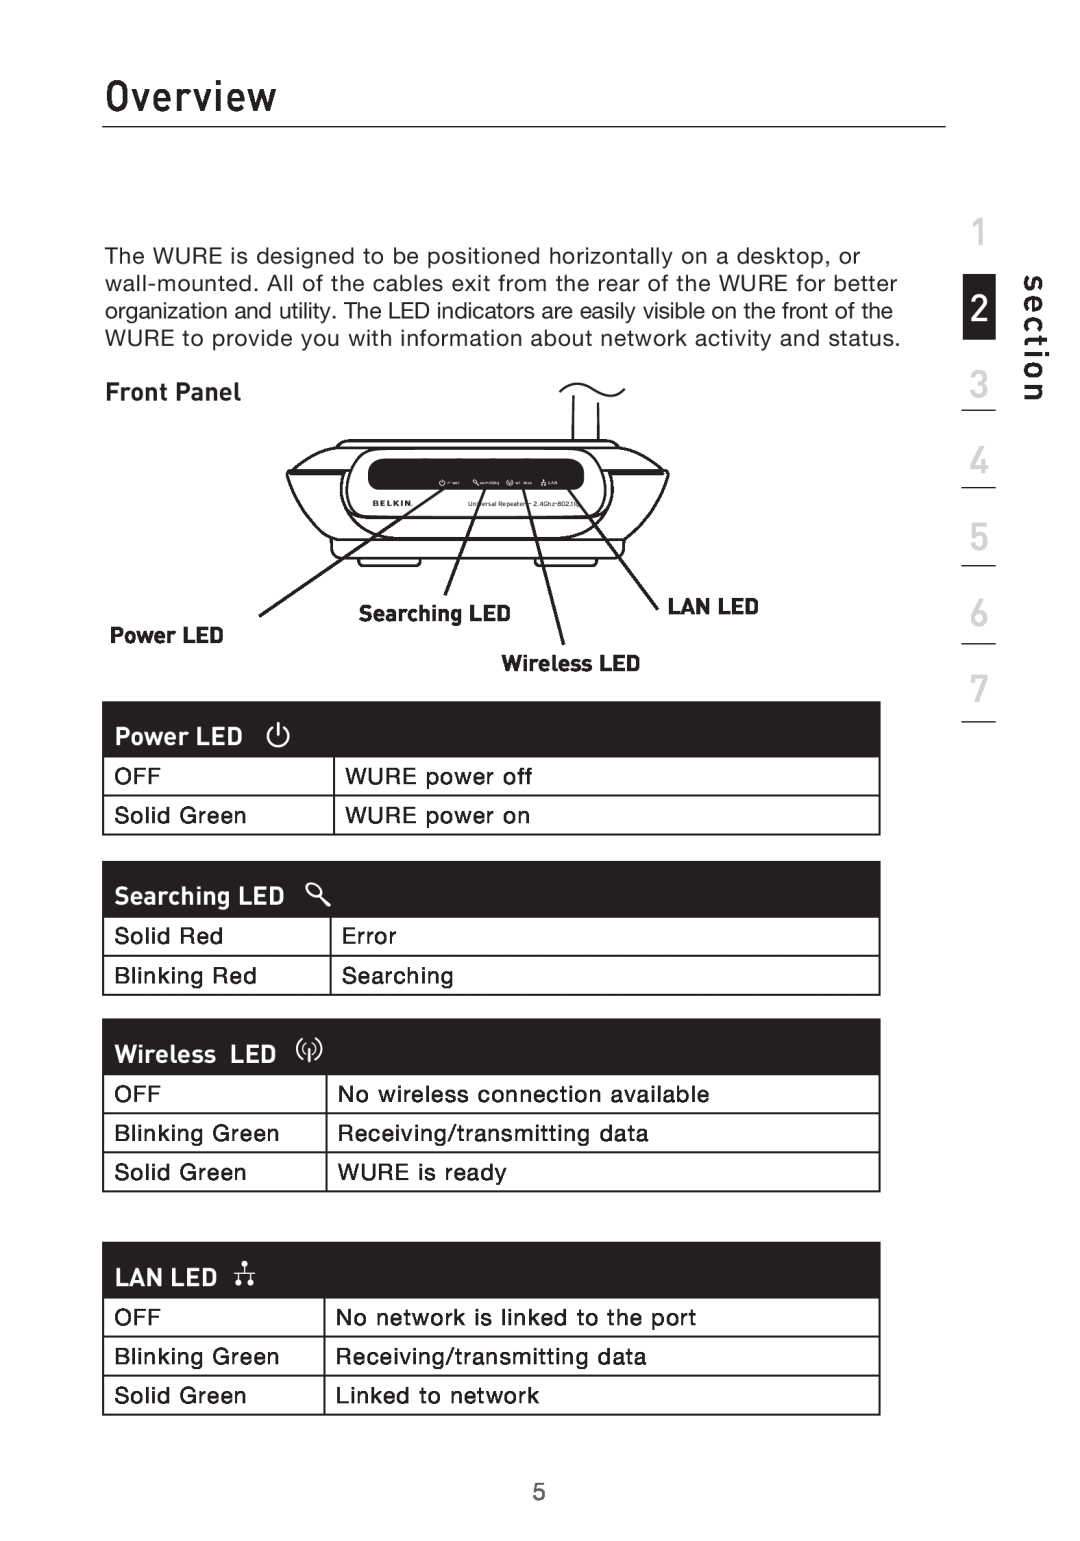 Belkin Range Extender/ Access Point manual Overview, Front Panel, Power LED, Wireless LED, section, Searching LED, Lan Led 